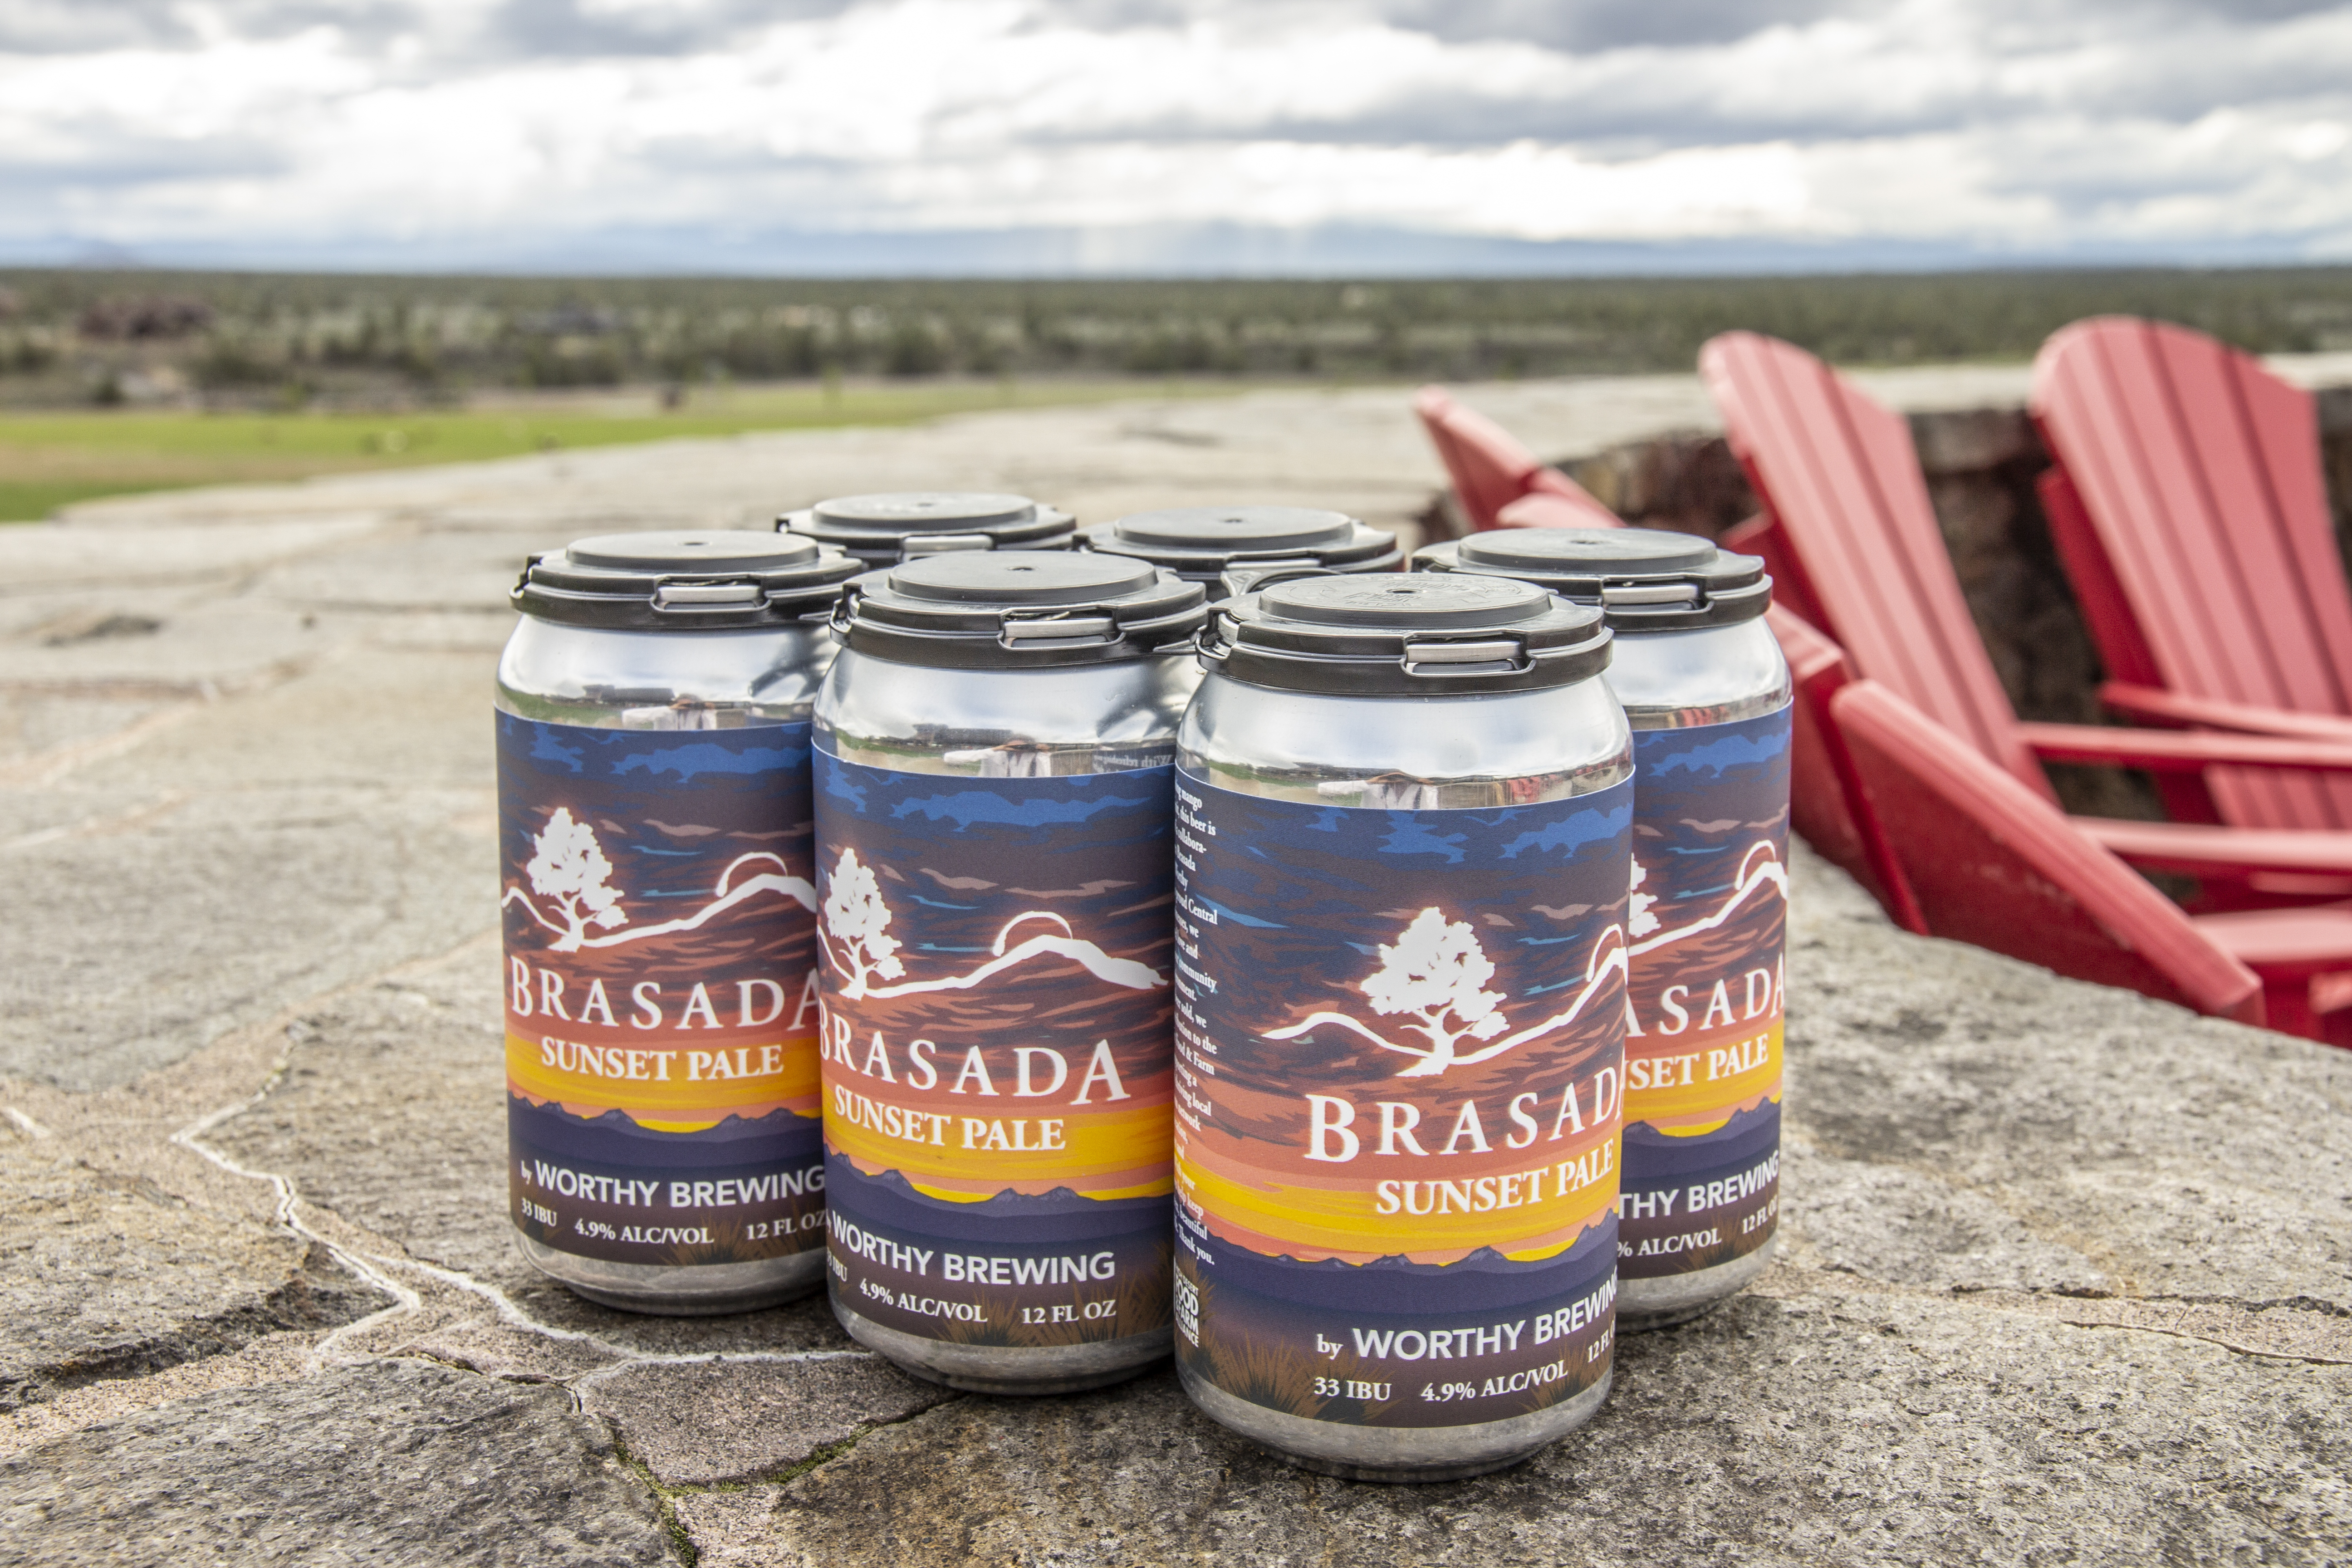 image of the 6-pack of Brasada Sunset Pale Ale courtesy of Worthy Brewing